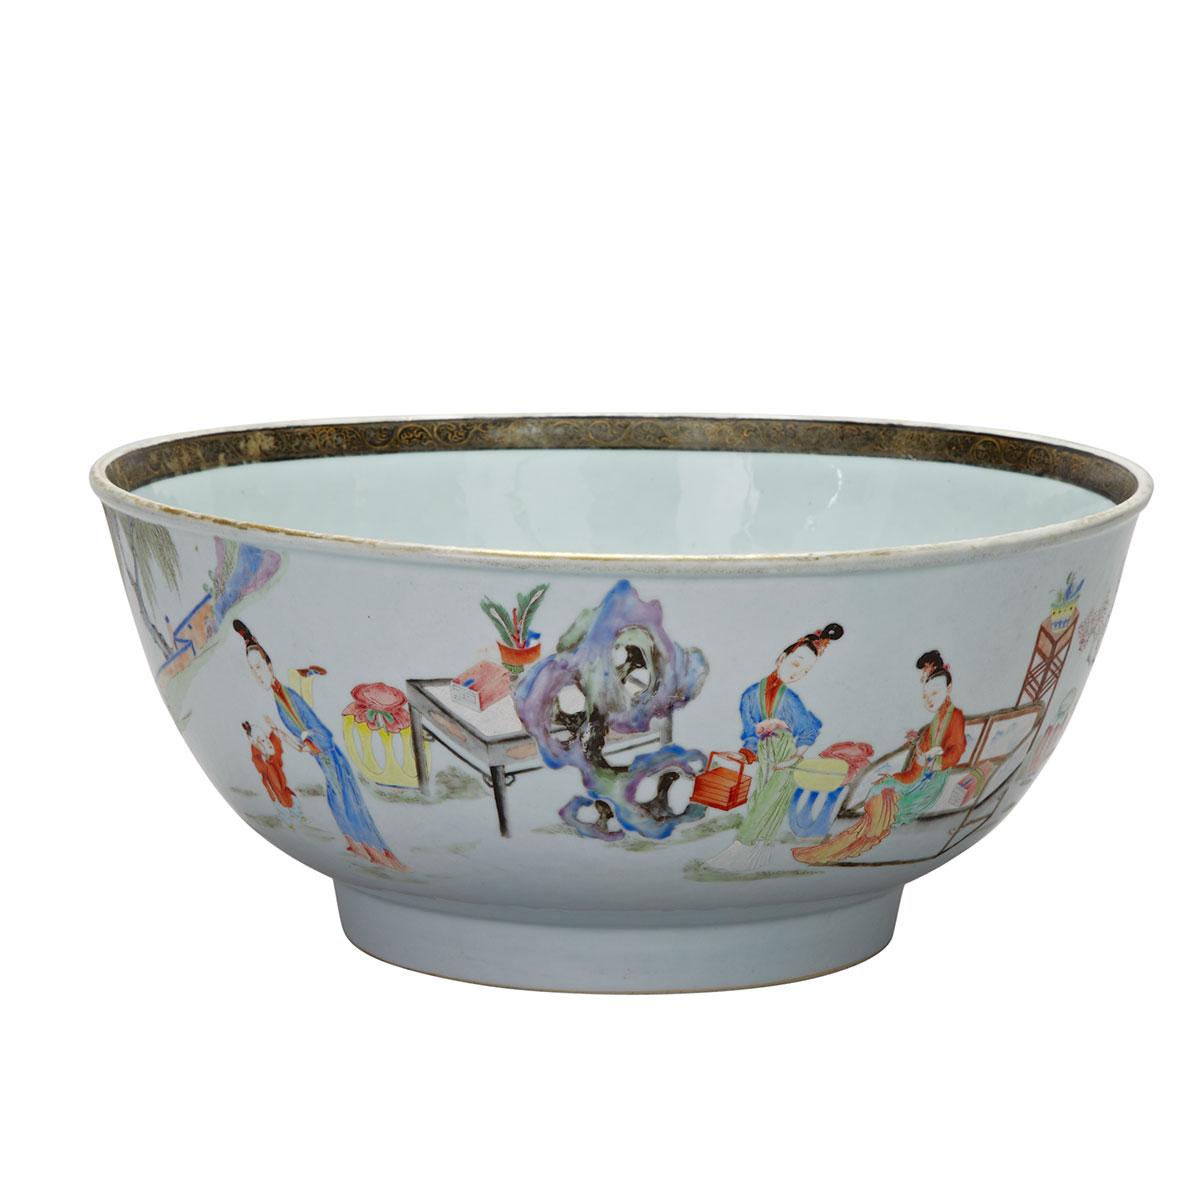 Large Export Famille Rose Punch Bowl, 18th/19th Century